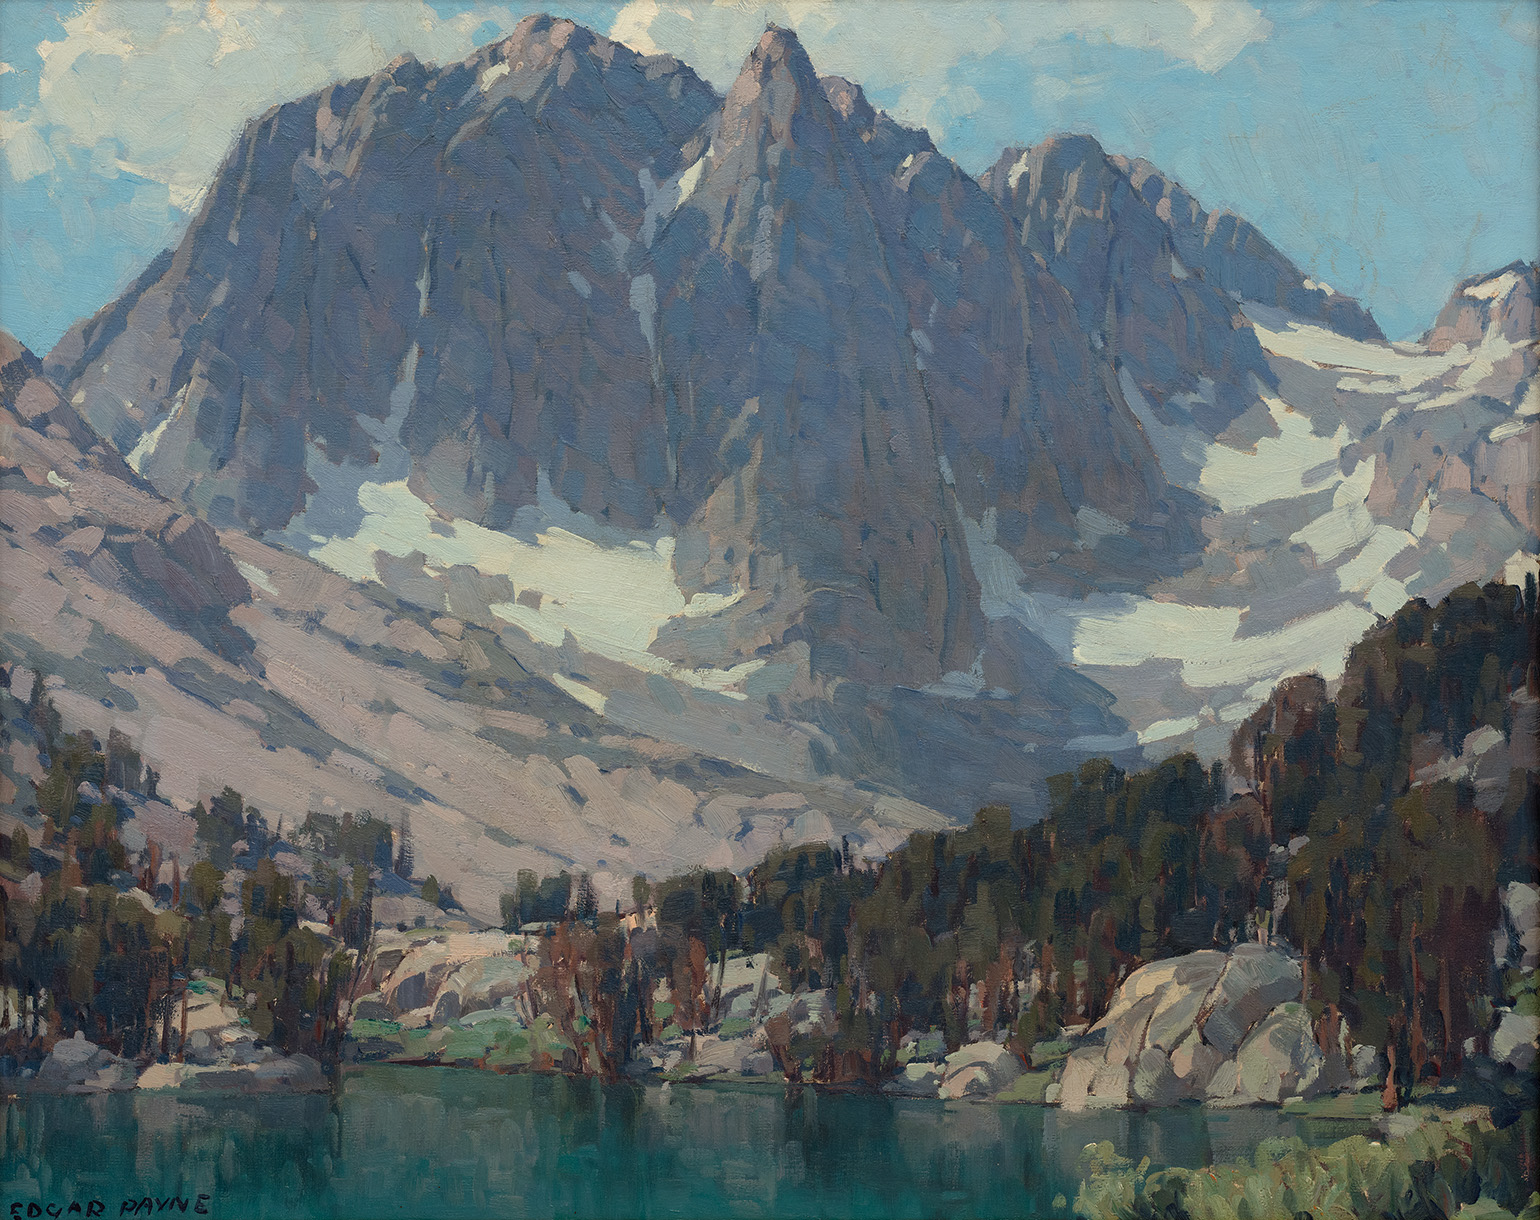 Edgar Payne, Temple Crag, circa 1920, Oil on canvas, 32 x 40 in. The Buck Collection at UCI Institute and Museum of California Art